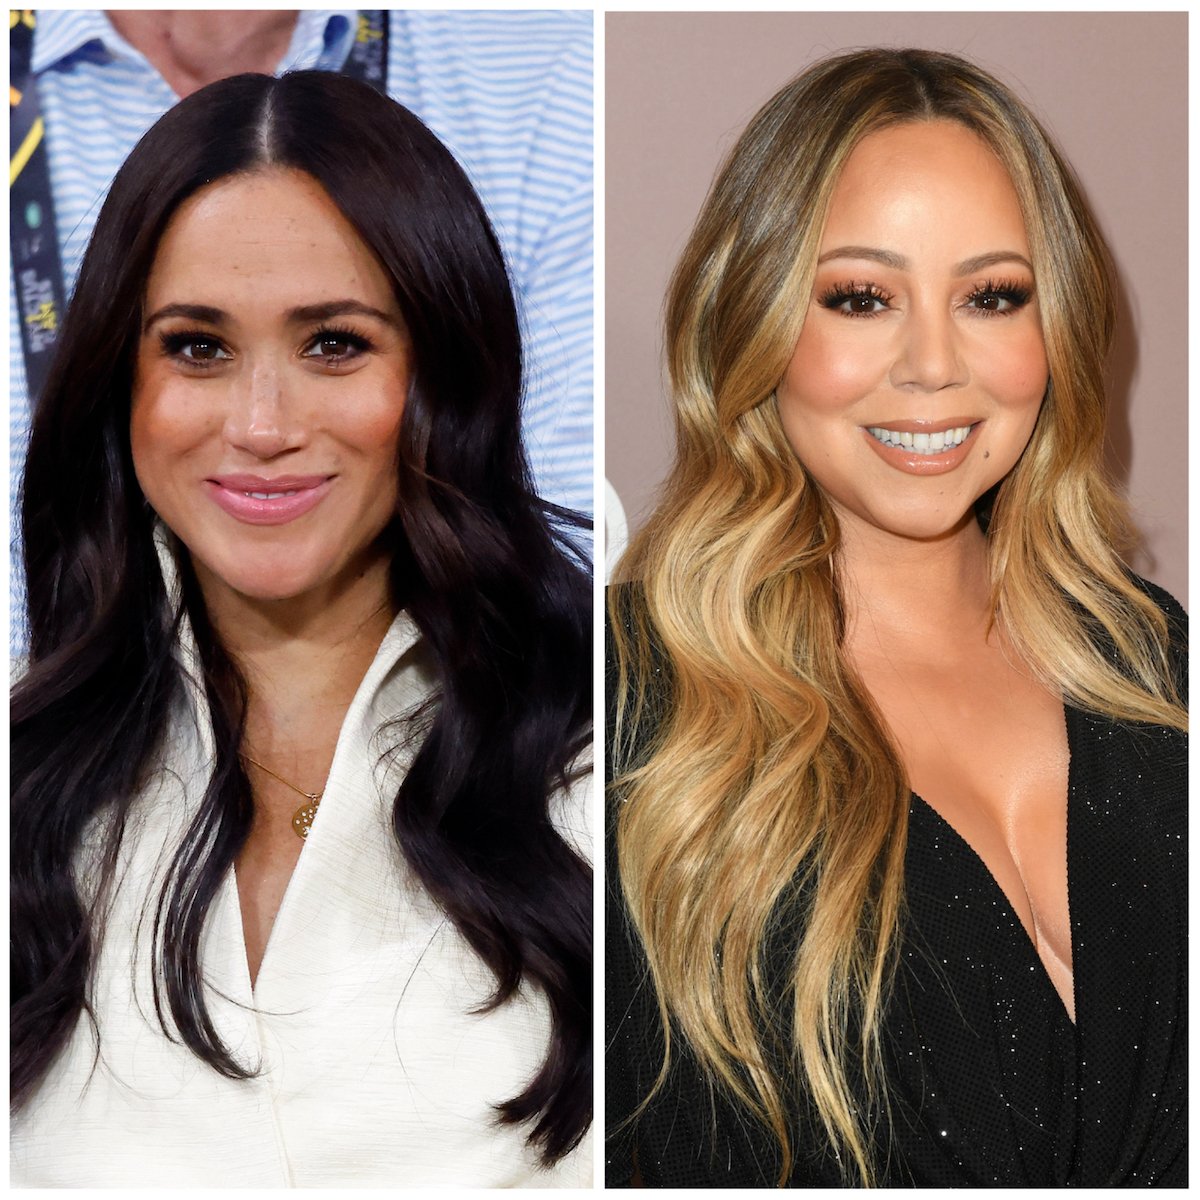 Meghan Markle, who 'started to sweat' when Mariah Carey called her a 'diva' on 'Archetypes' podcast, looks on; Mariah Carey, who said Meghan Markle has 'diva moments' on Meghan Markle's Spotify podcast, smiles wearing a black dress